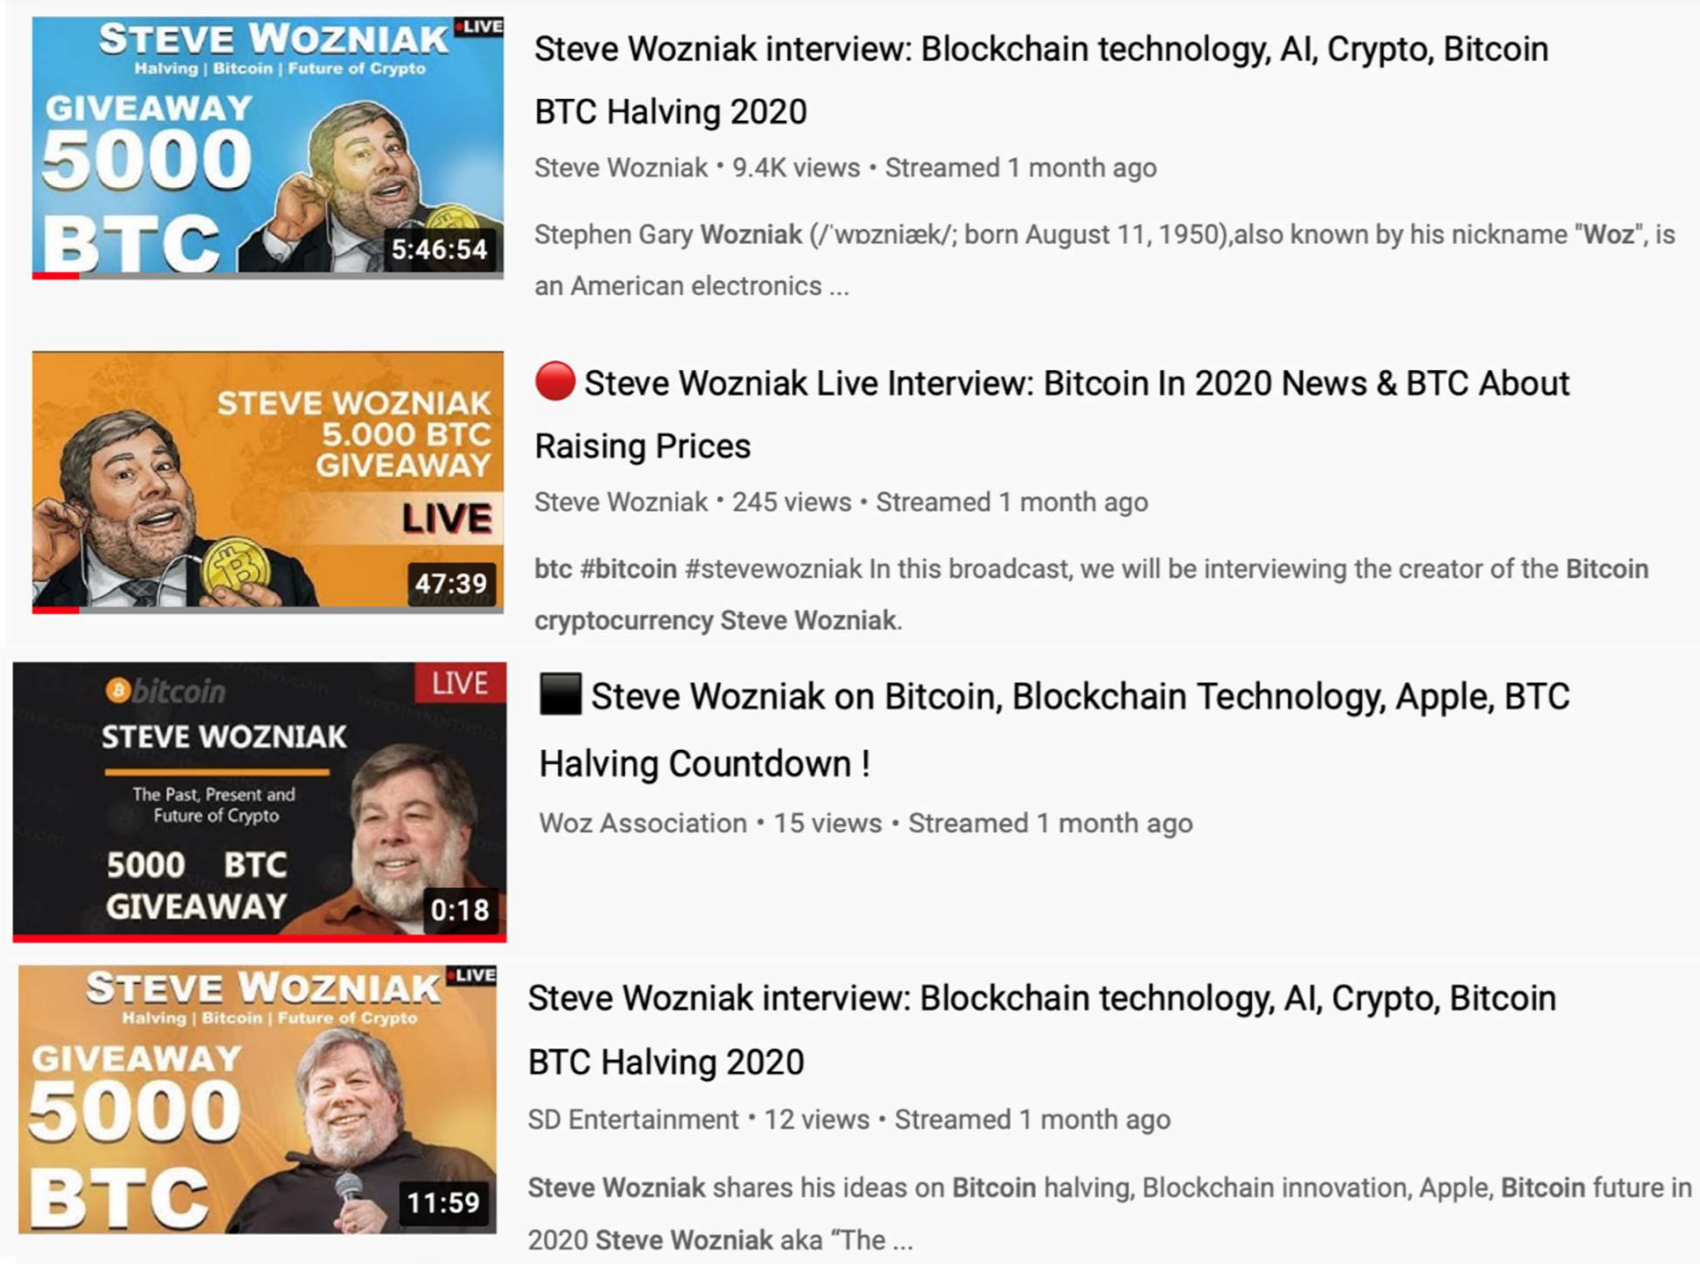 Steve Wozniak Sues Youtube, Google for Promoting Bitcoin Giveaway Scam — Youtube Denies Fault